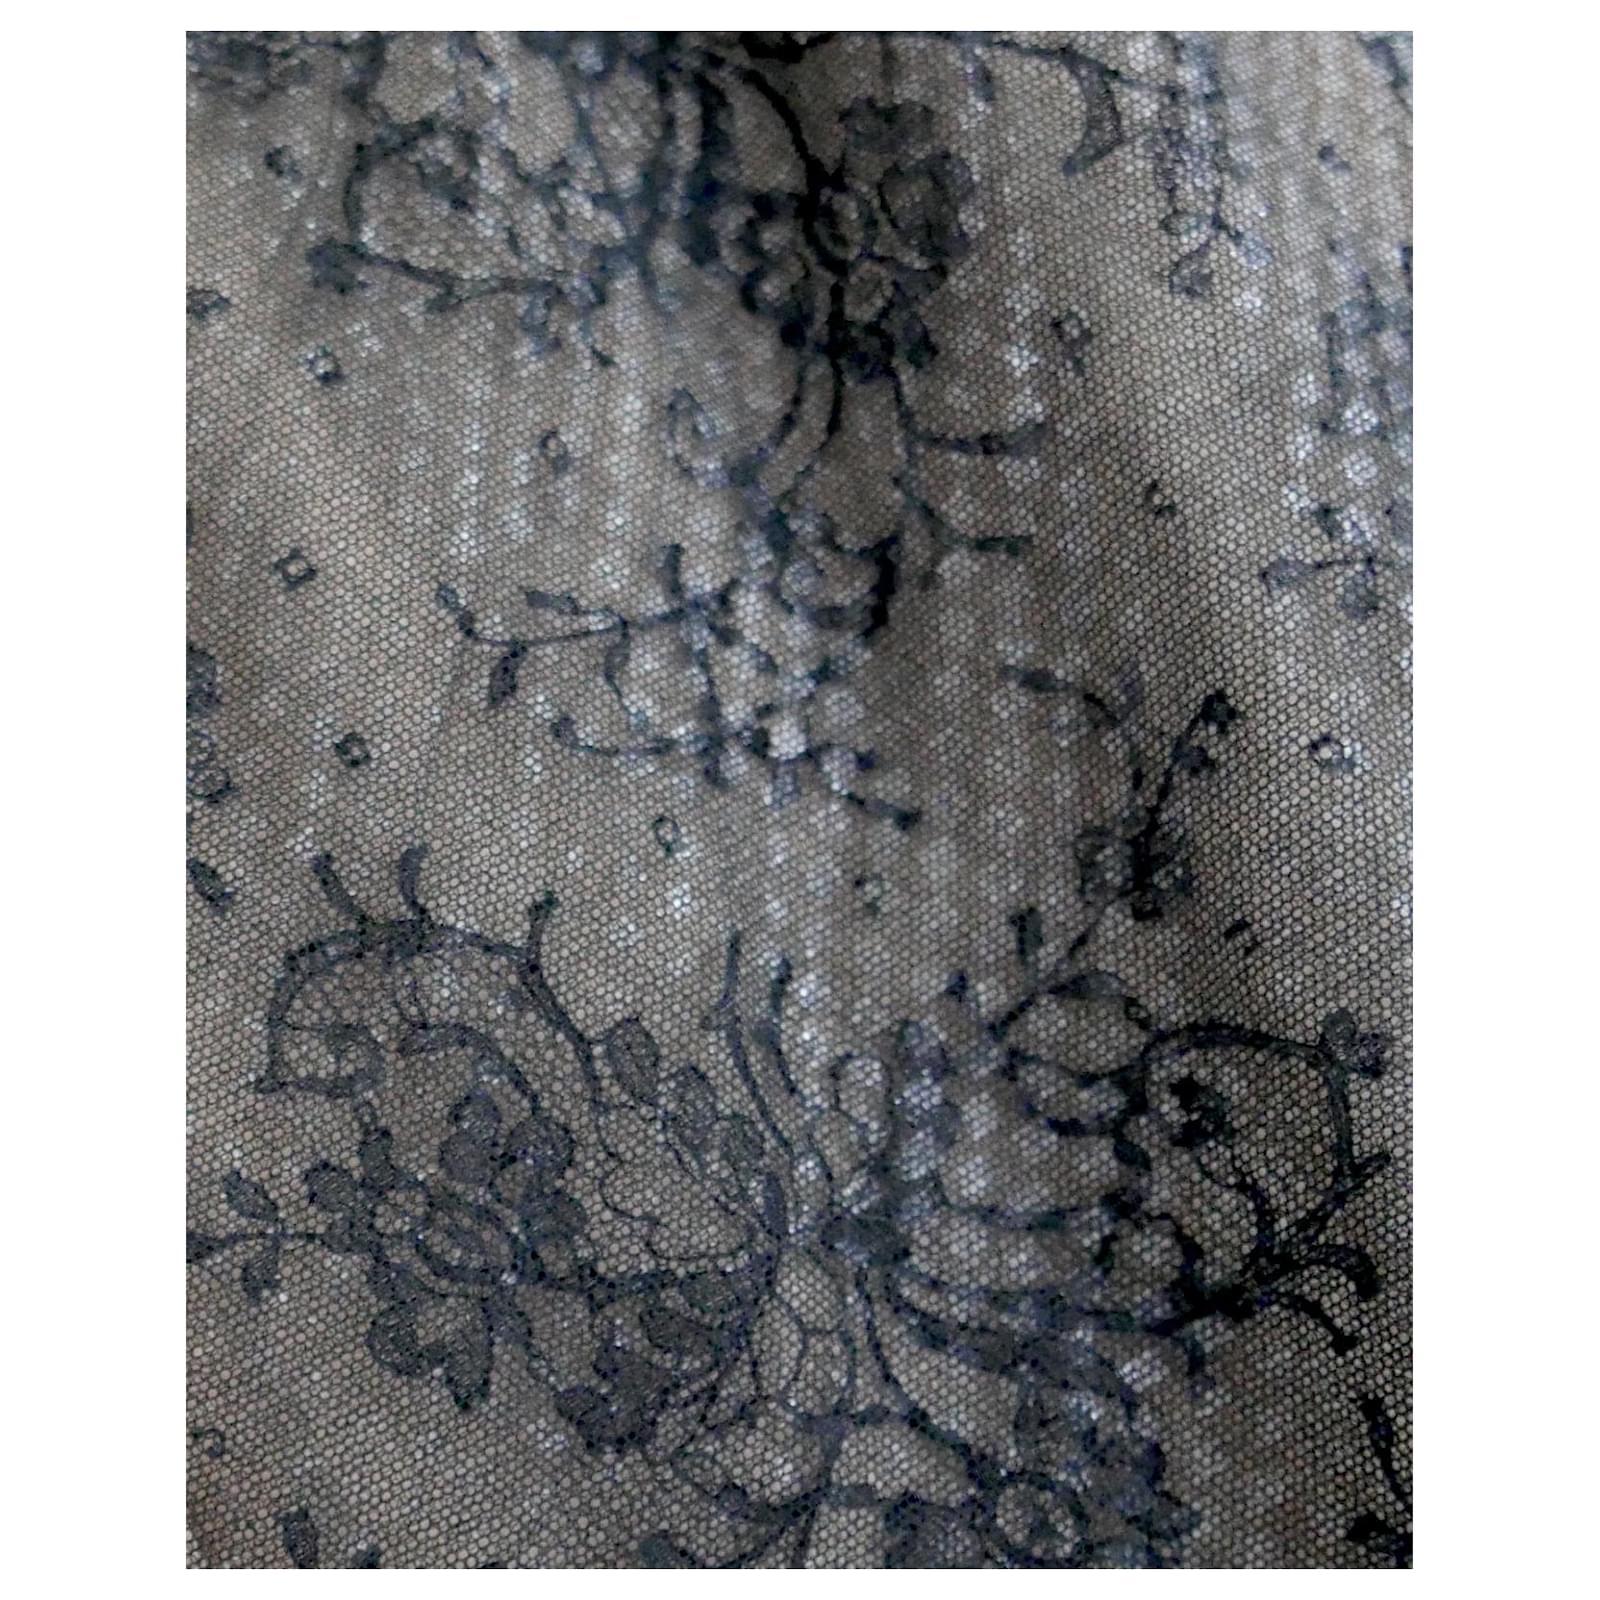 Gucci x Tom Ford Spring 1999 Black Lace Skirt In Excellent Condition For Sale In London, GB